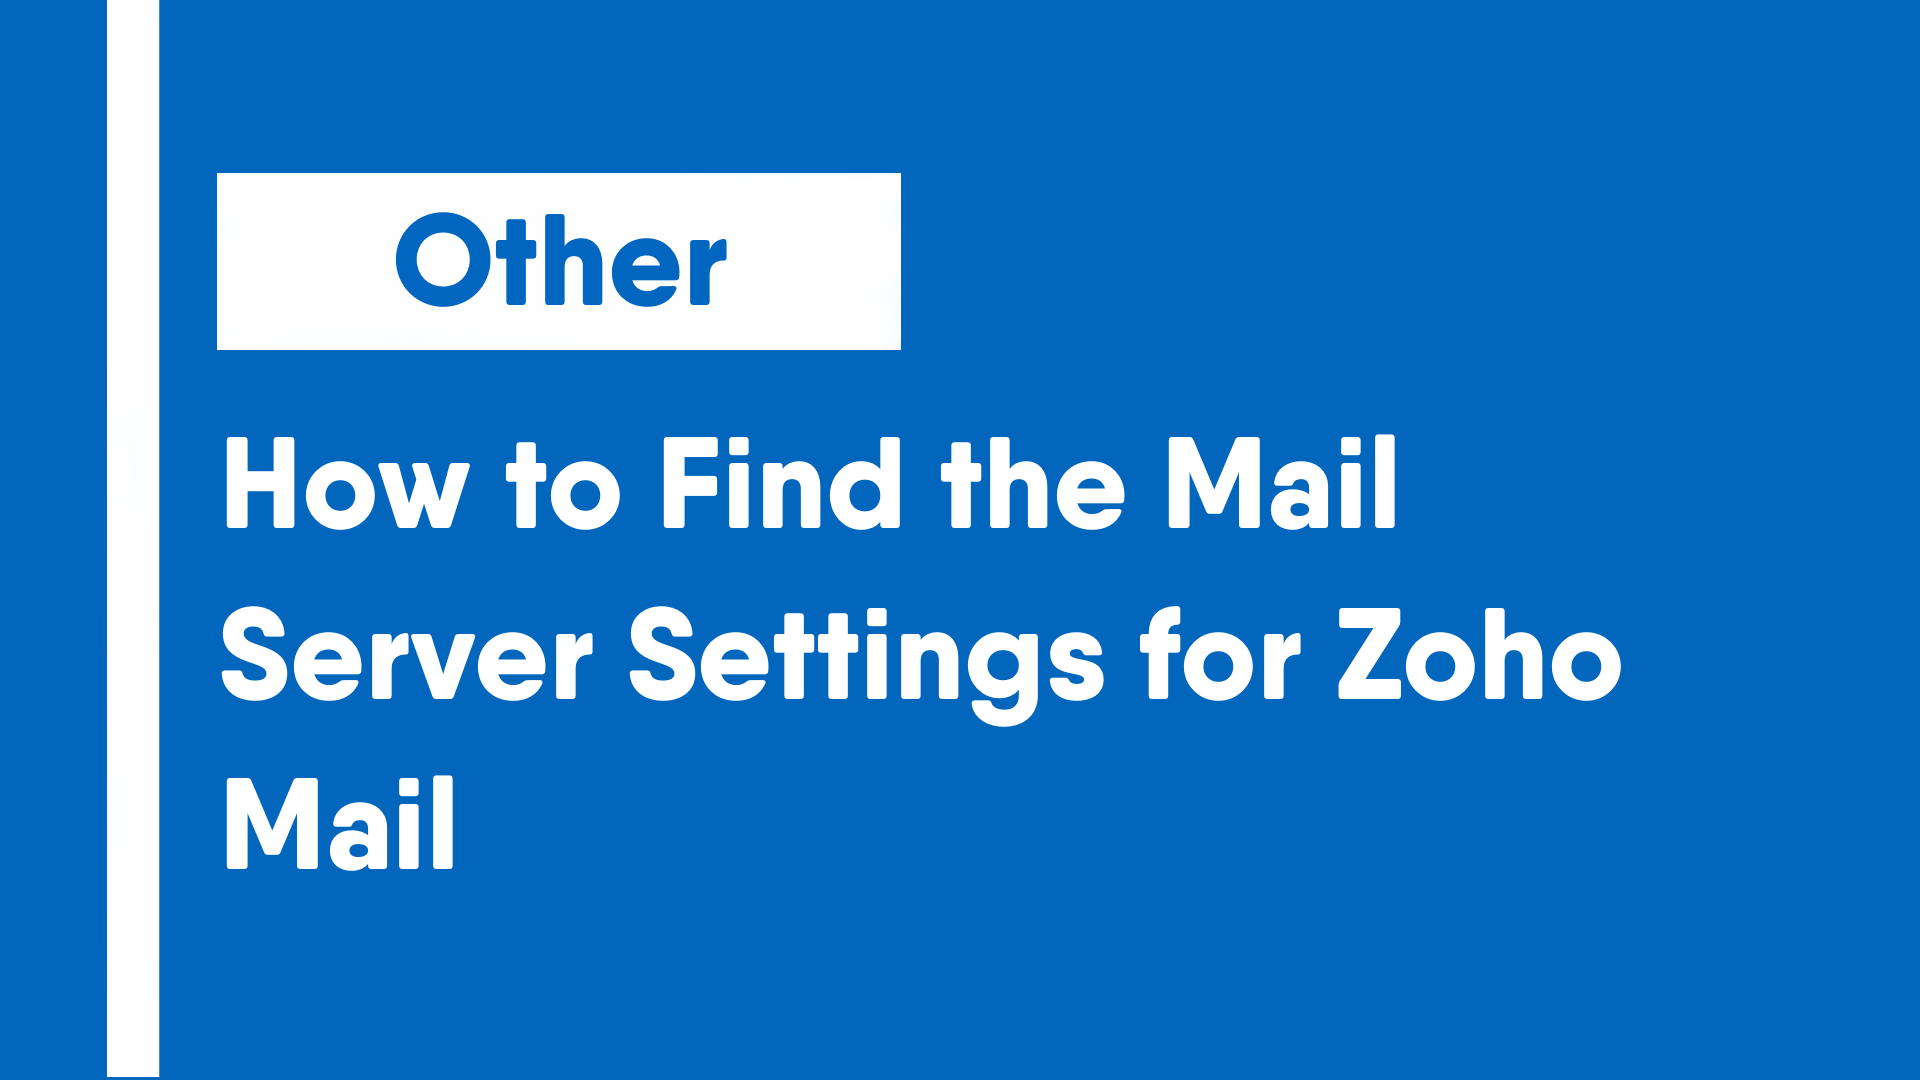 How to Find the Mail Server Settings for Zoho Mail